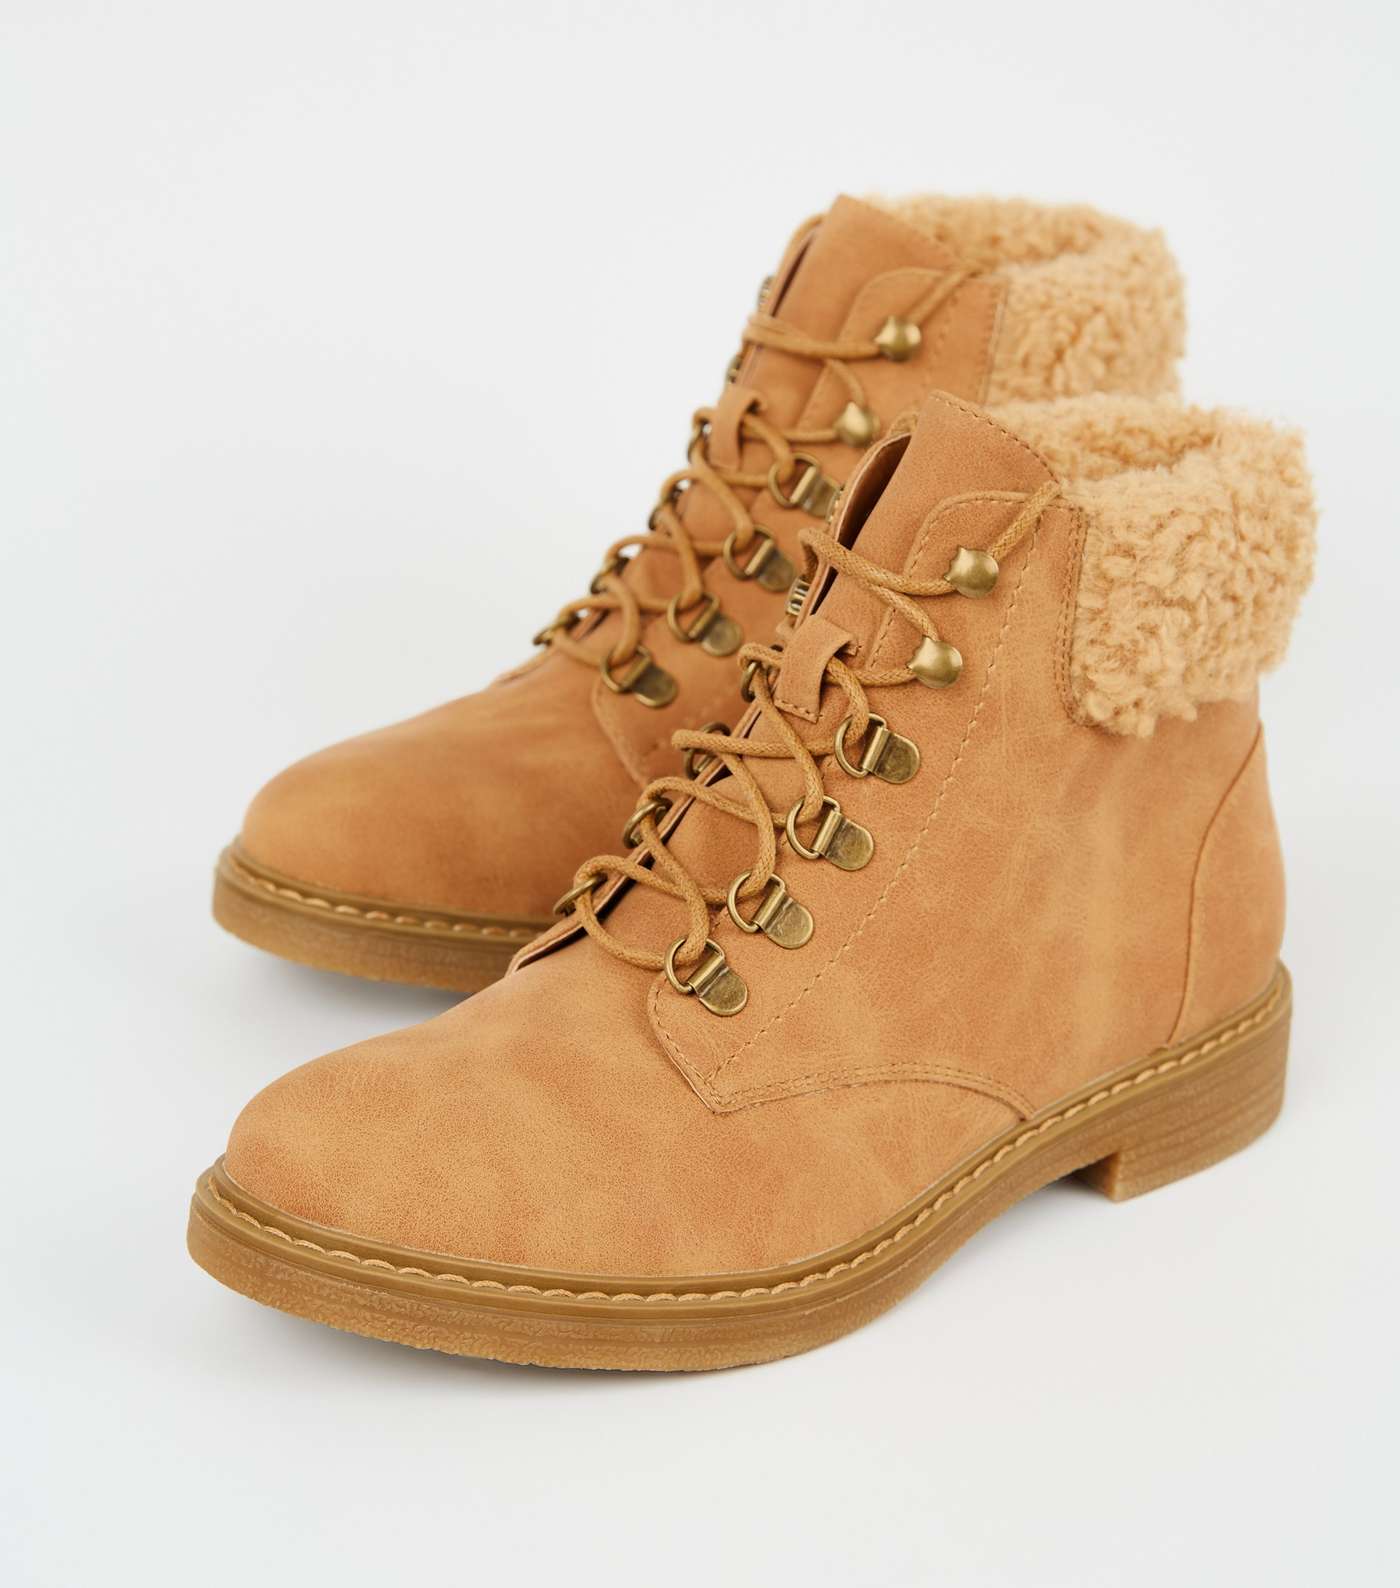 Girls Tan Teddy Trim Lace Up Boots Image 3